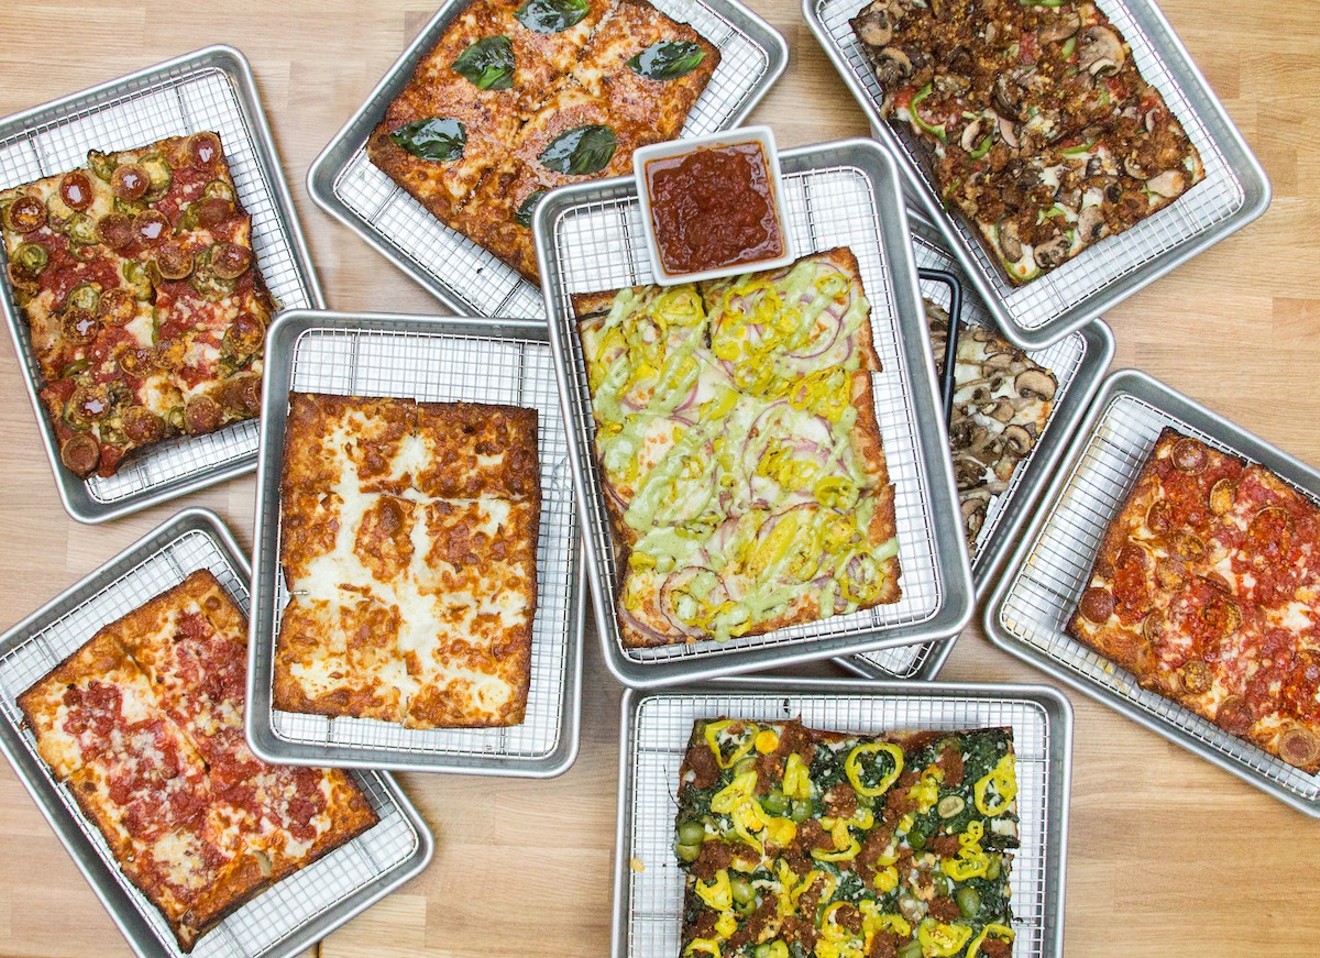 All the pizzas — in Detroit-style — await at Emmy Squared.